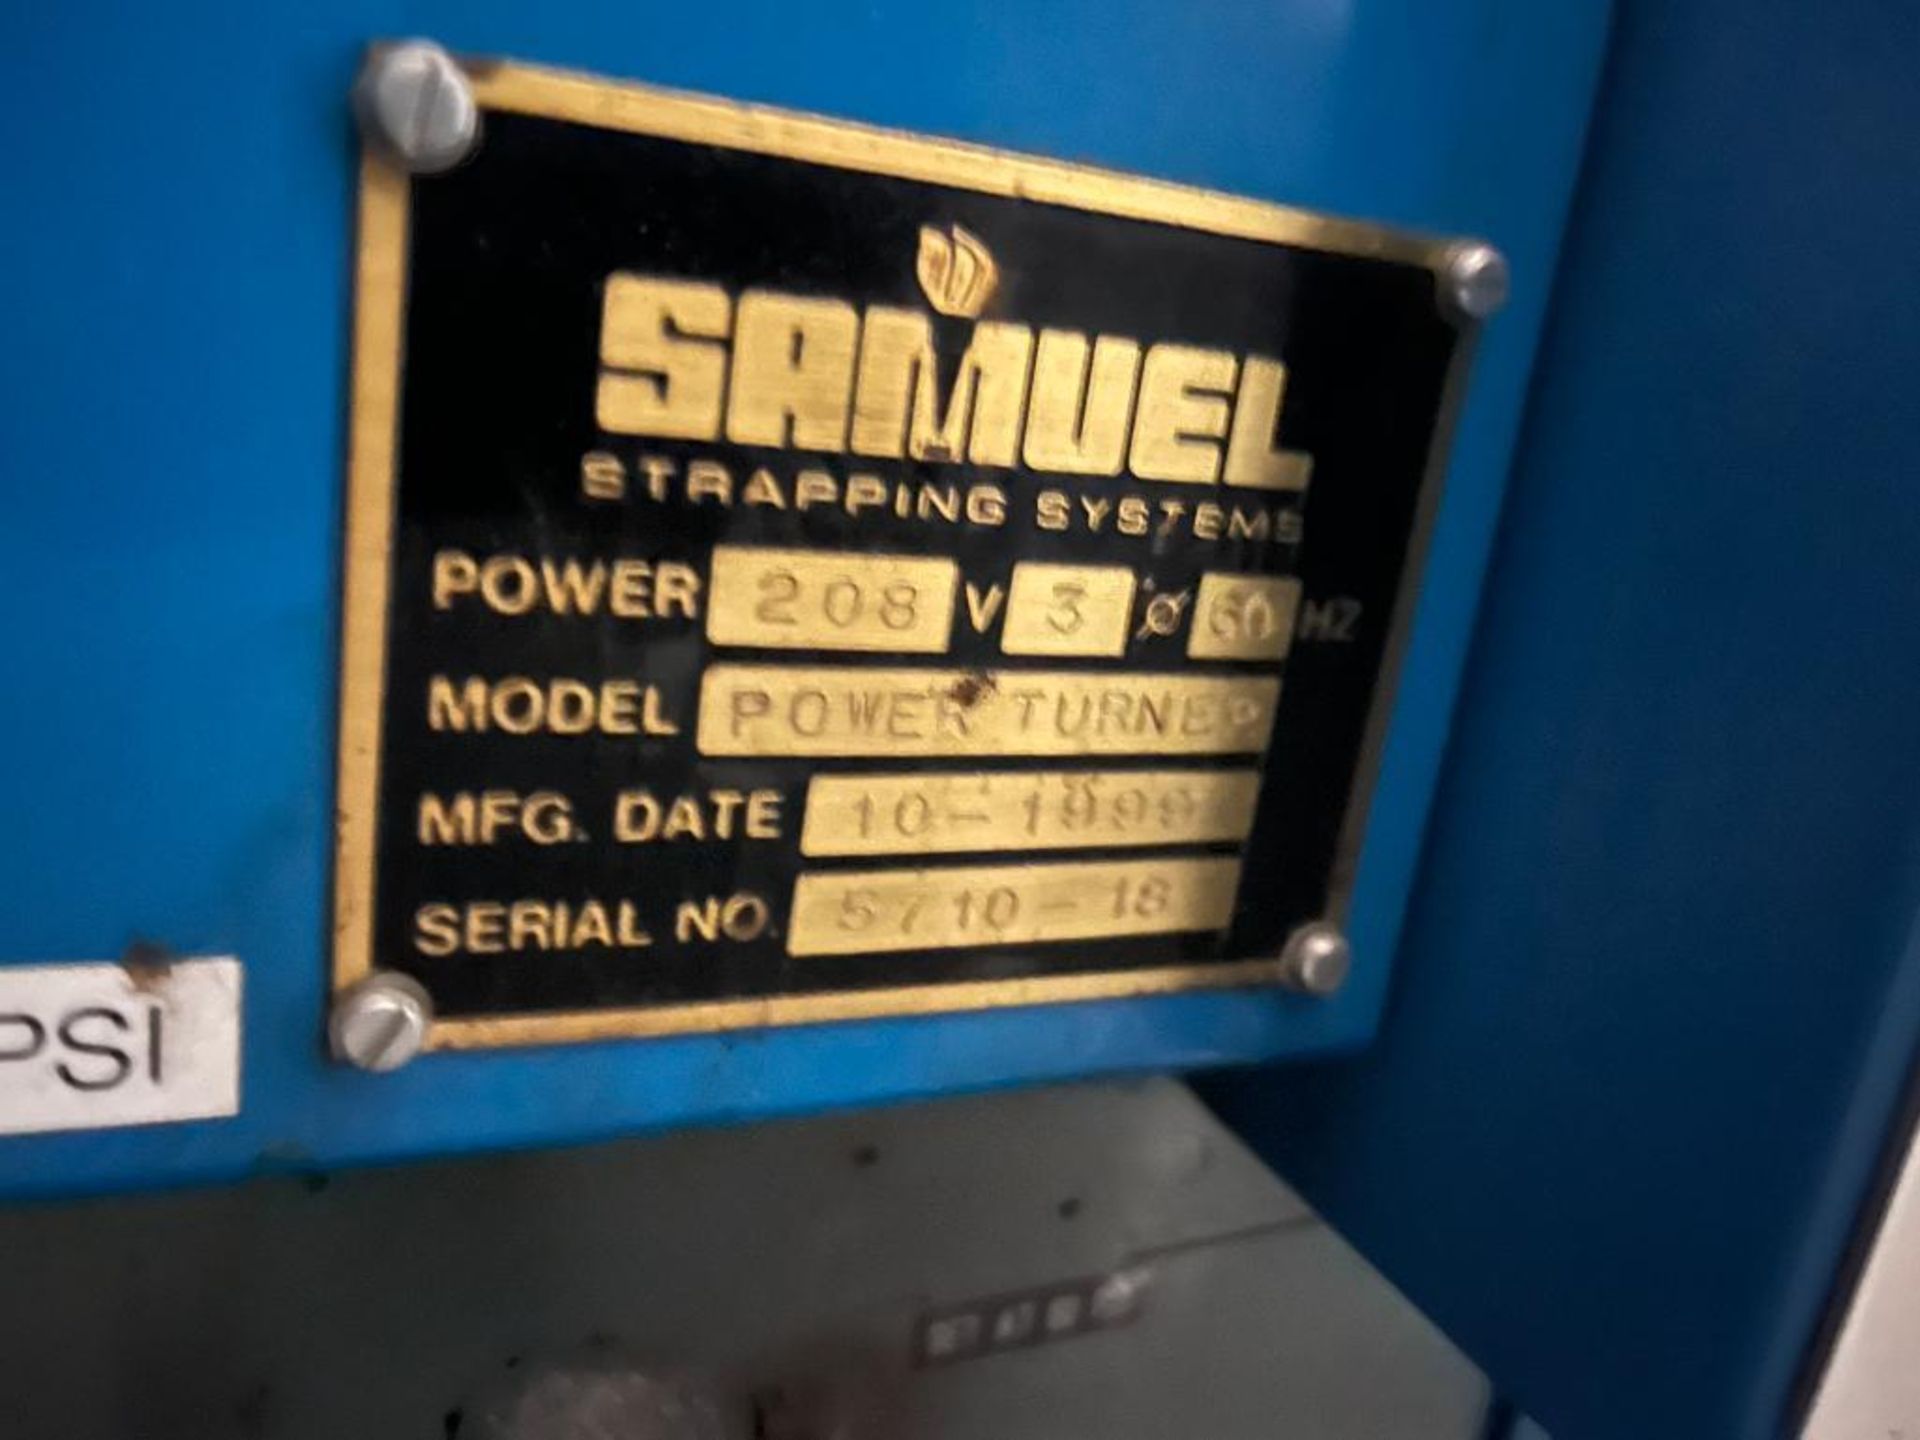 Samuel Strapping Systems Power Turner, S/N 5710-12 (1999) - Image 3 of 3